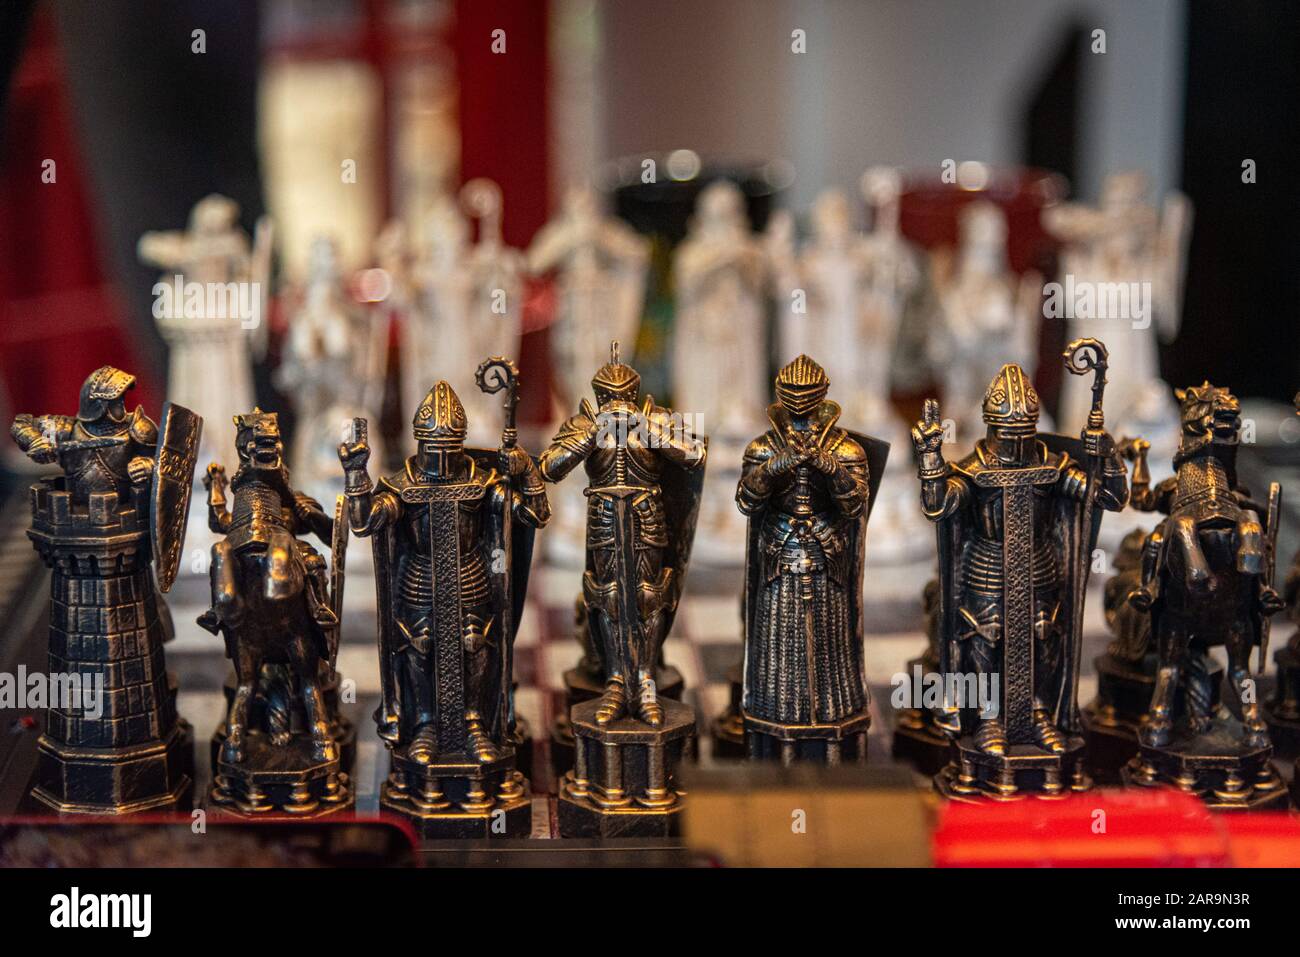 LIVERPOOL, ENGLAND, DECEMBER 27, 2018: The Wizard Chess model. Figurines of the Harry Potter chess game. Focused on blacks while whites are in bokeh. Stock Photo